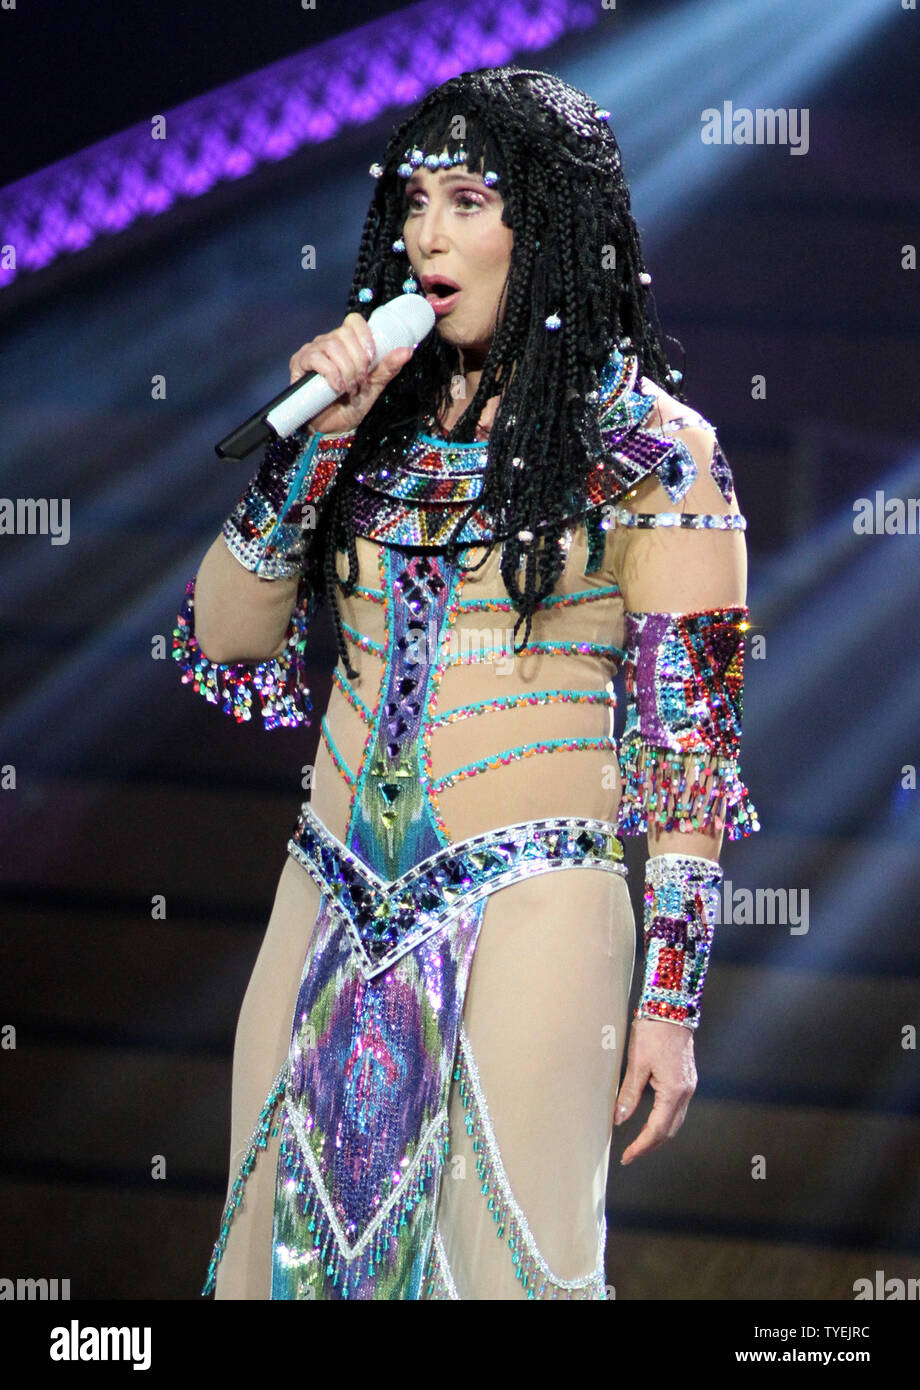 Cher performs in concert on her "D2K Tour", at the BB & T Center in Sunrise, Florida on May 17, 2014.  UPI/Michael Bush Stock Photo